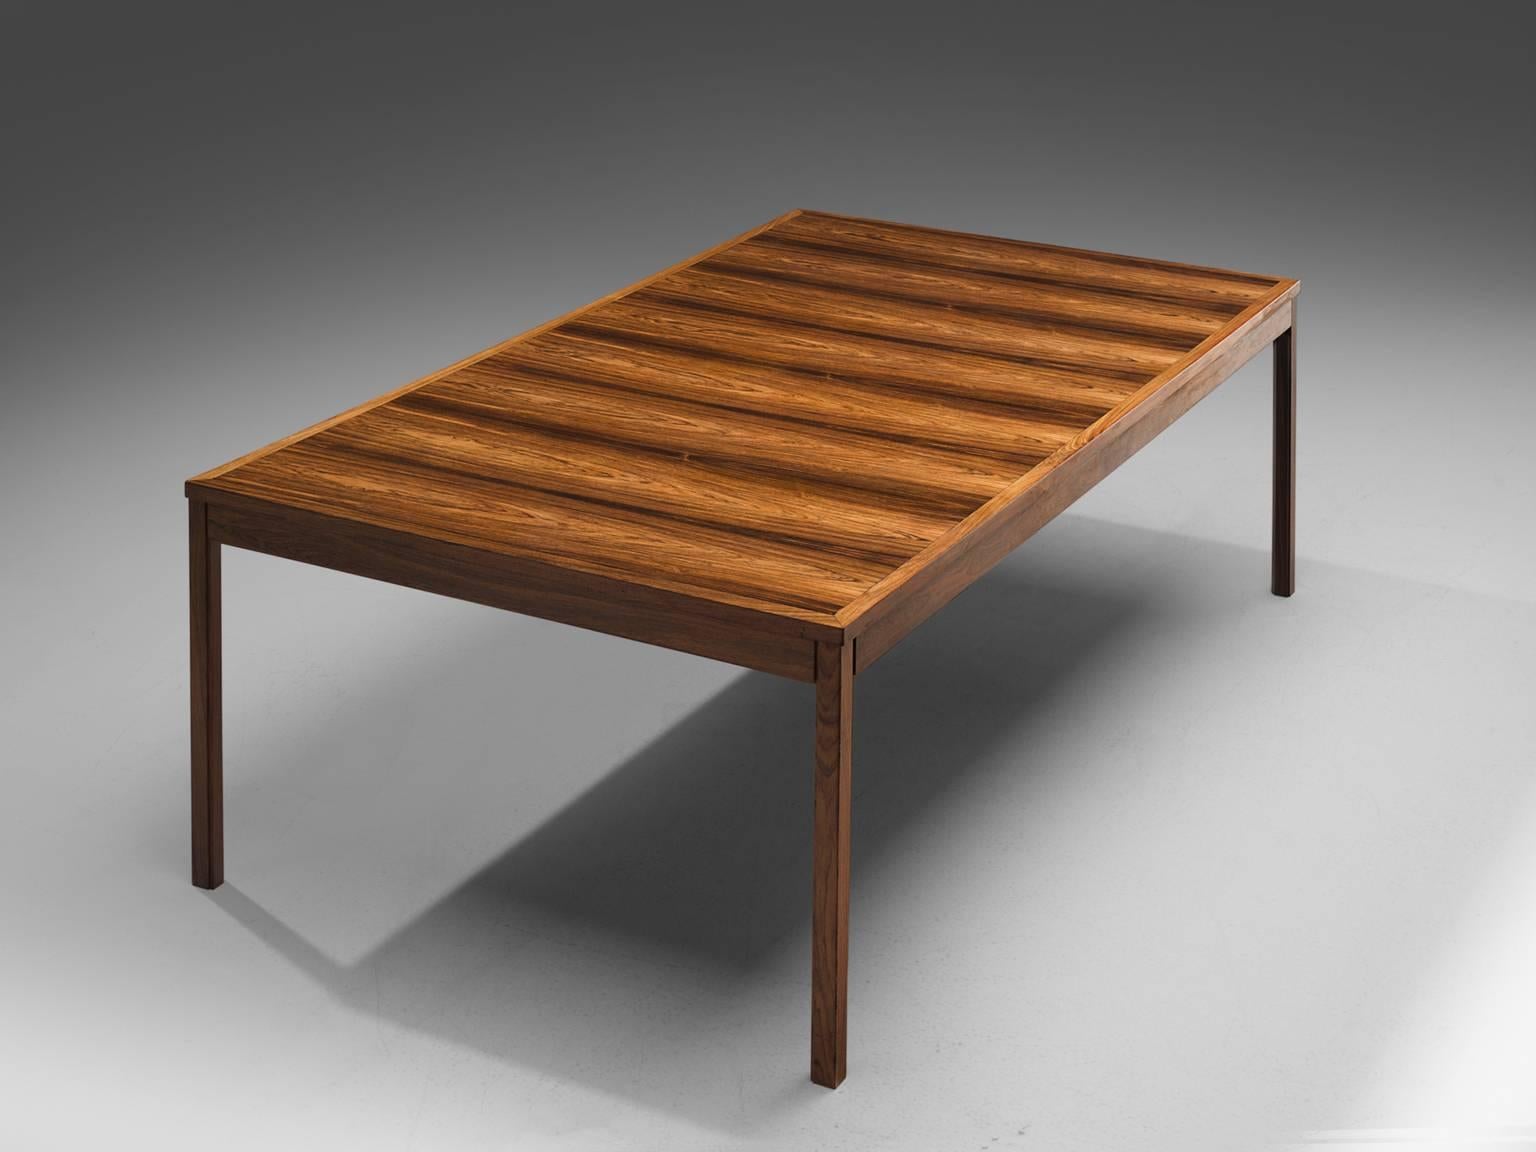 Produced by Søren Willadsen, dining table, rosewood, Denmark, 1960s.

This architectural dining table is produced by Søren Willadsen, as can be seen in the SW logo that is displayed underneath the table. The table is executed in rosewood, the